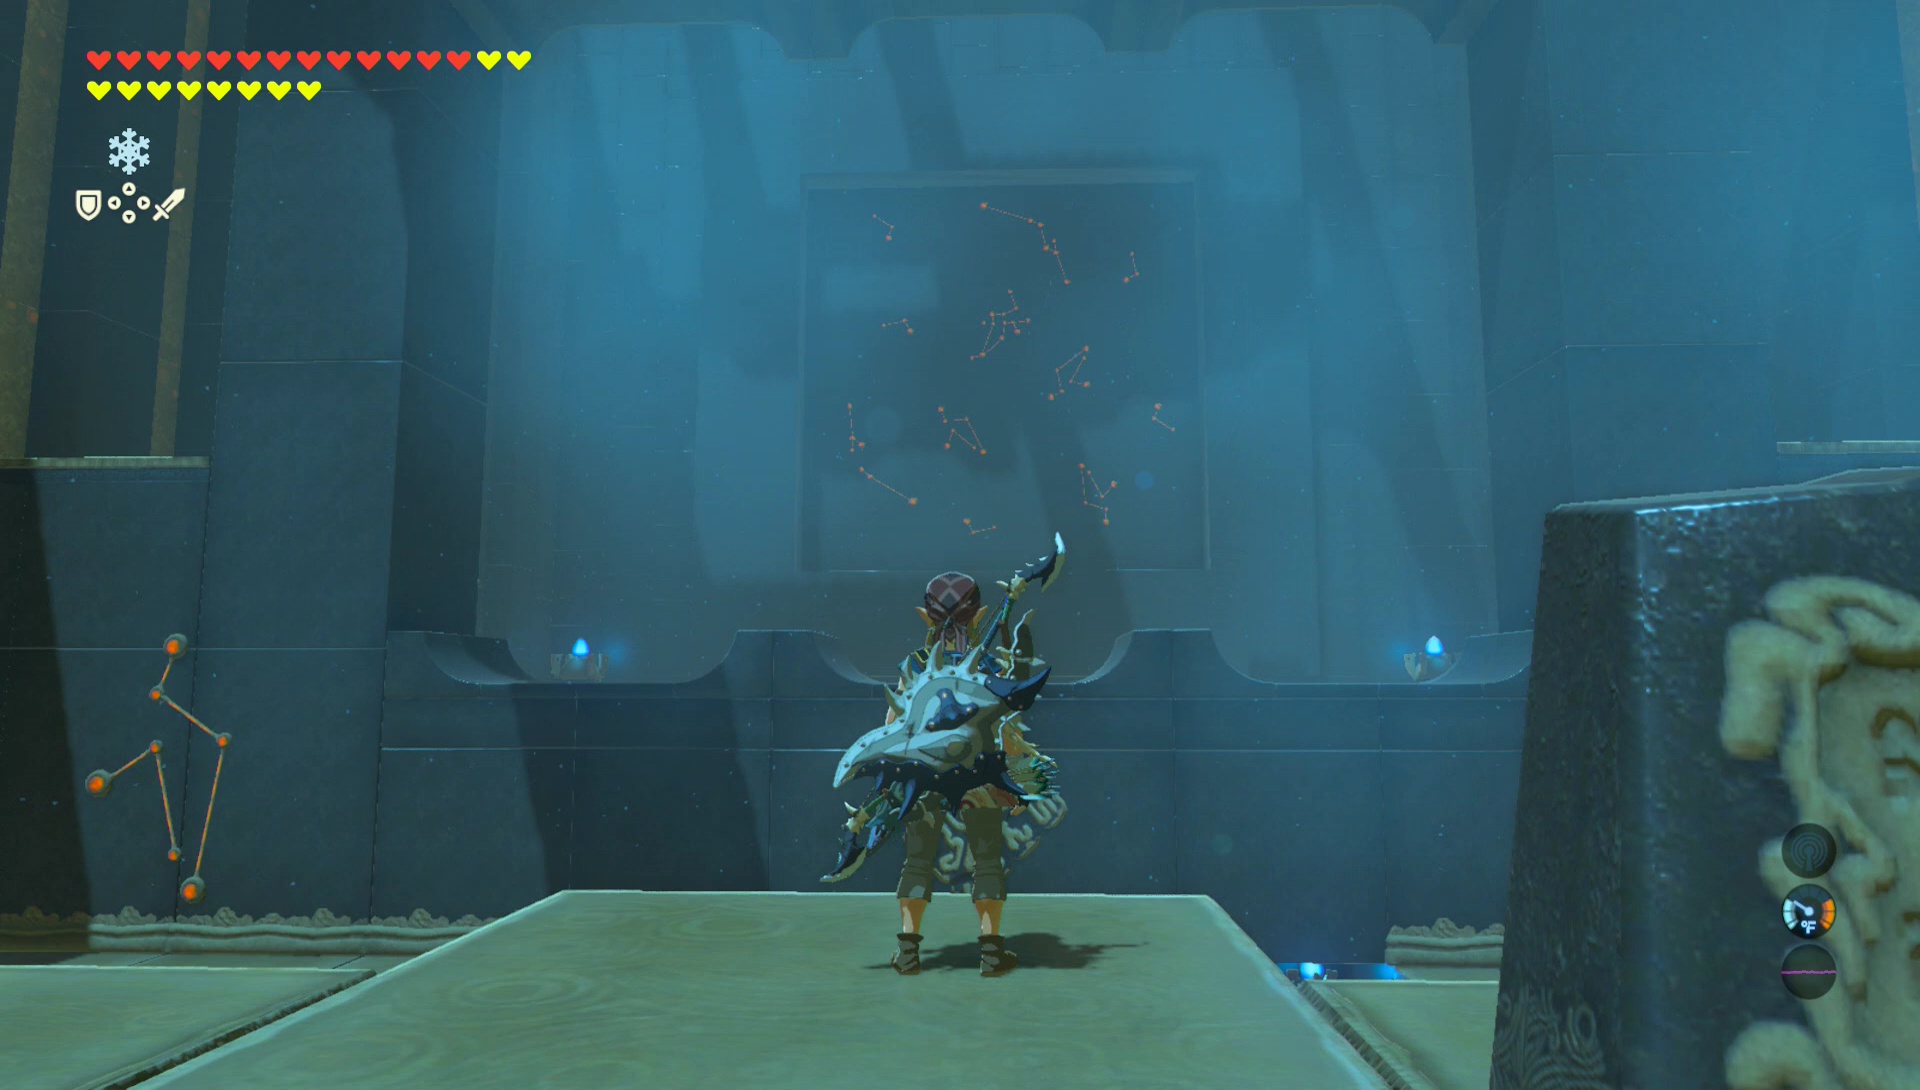 How to beat the Keo Ruug Shrine (constellation puzzle) in Breath of the Wild